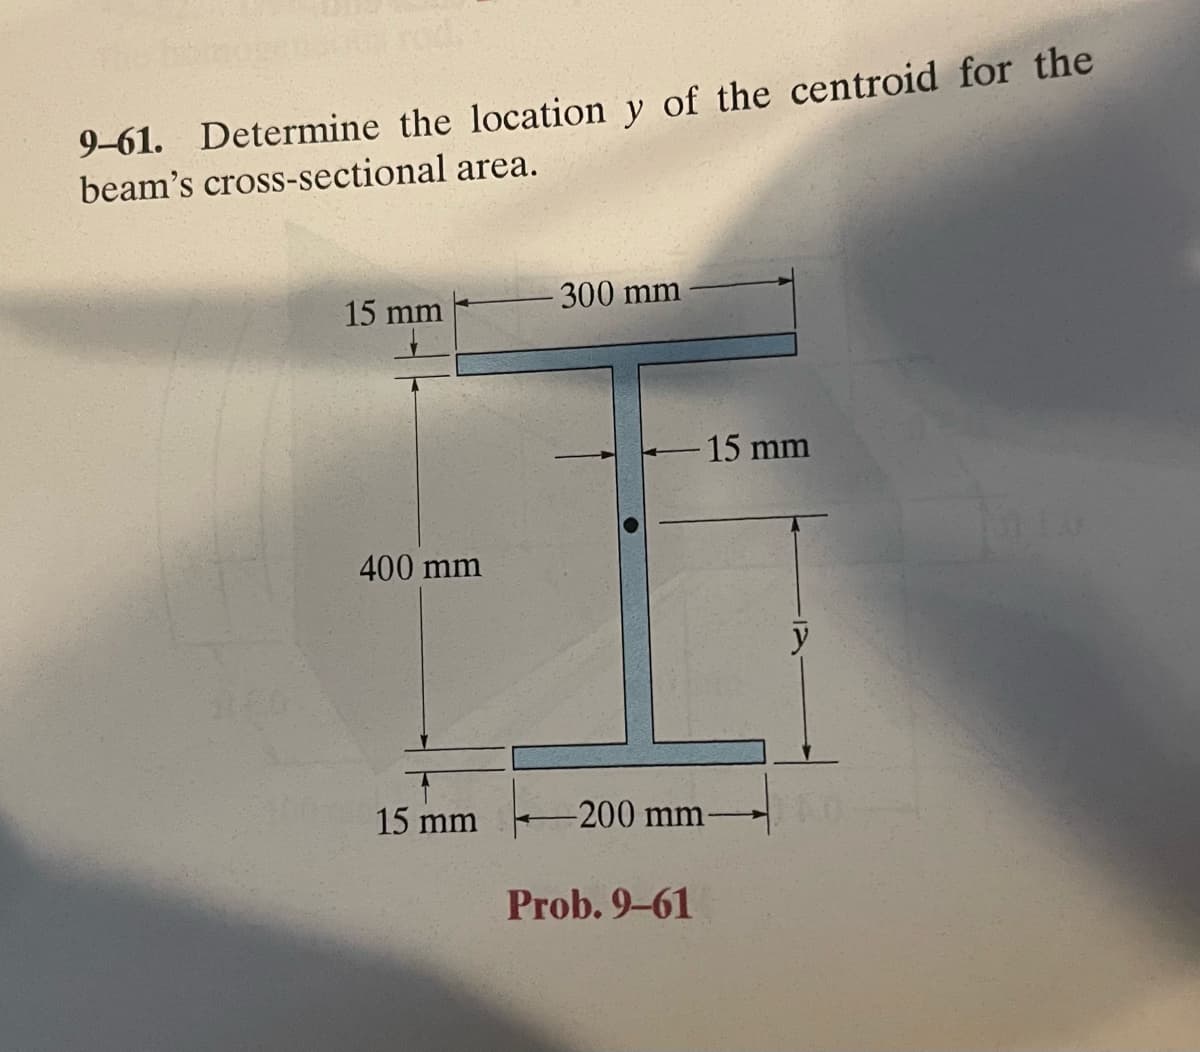 rod.
9-61. Determine the location y of the centroid for the
beam's cross-sectional area.
15 mm
400 mm
15 mm
300 mm
15 mm
-200 mm-
Prob. 9-61
y